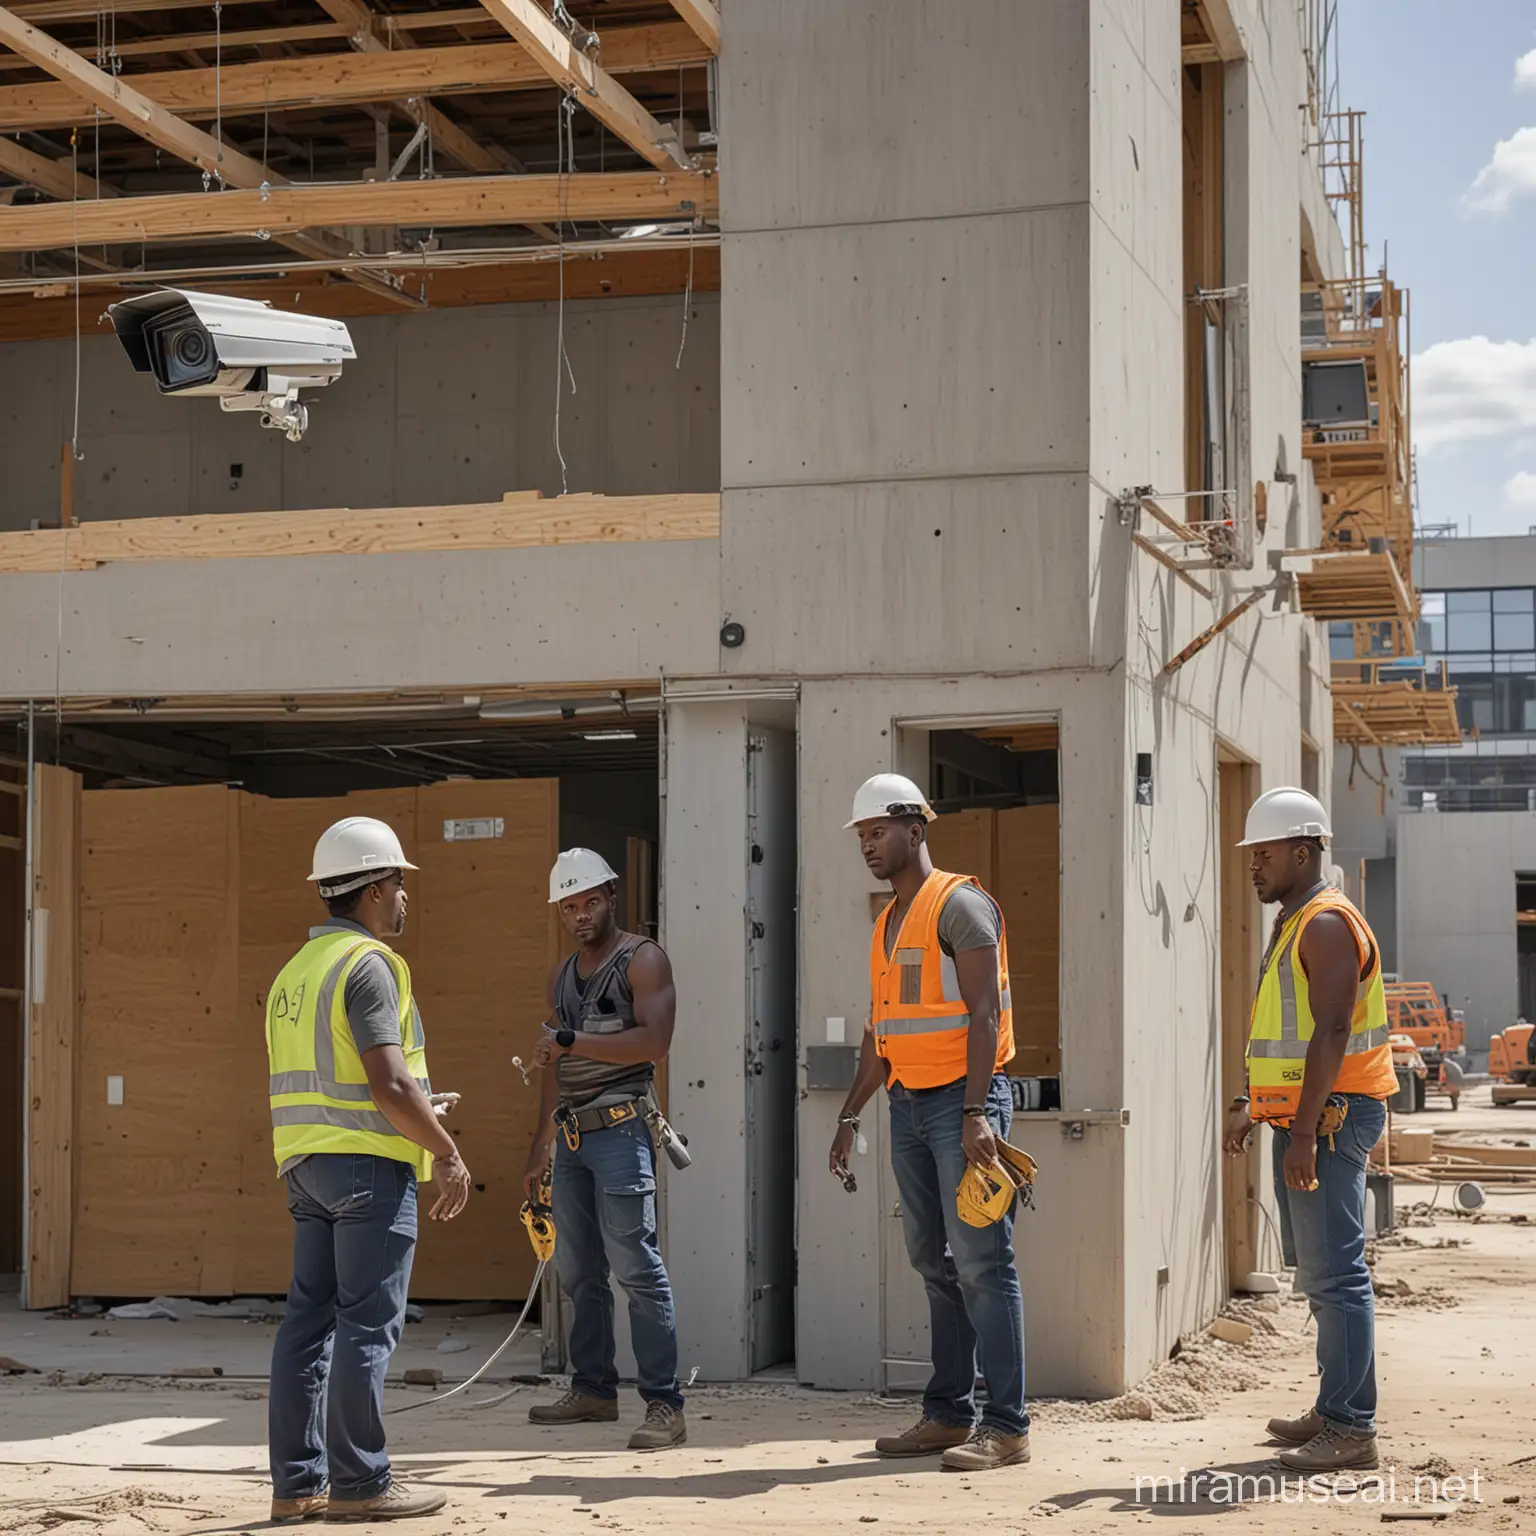 A sleek modern construction site, where (((African American construction workers))), some without shirts, are hard at work. One can see a (((CCTV camera))) positioned at the corner of the site, along with an (((access control system or biometric reader))) for logging in workers via fingerprint or facial recognition technology